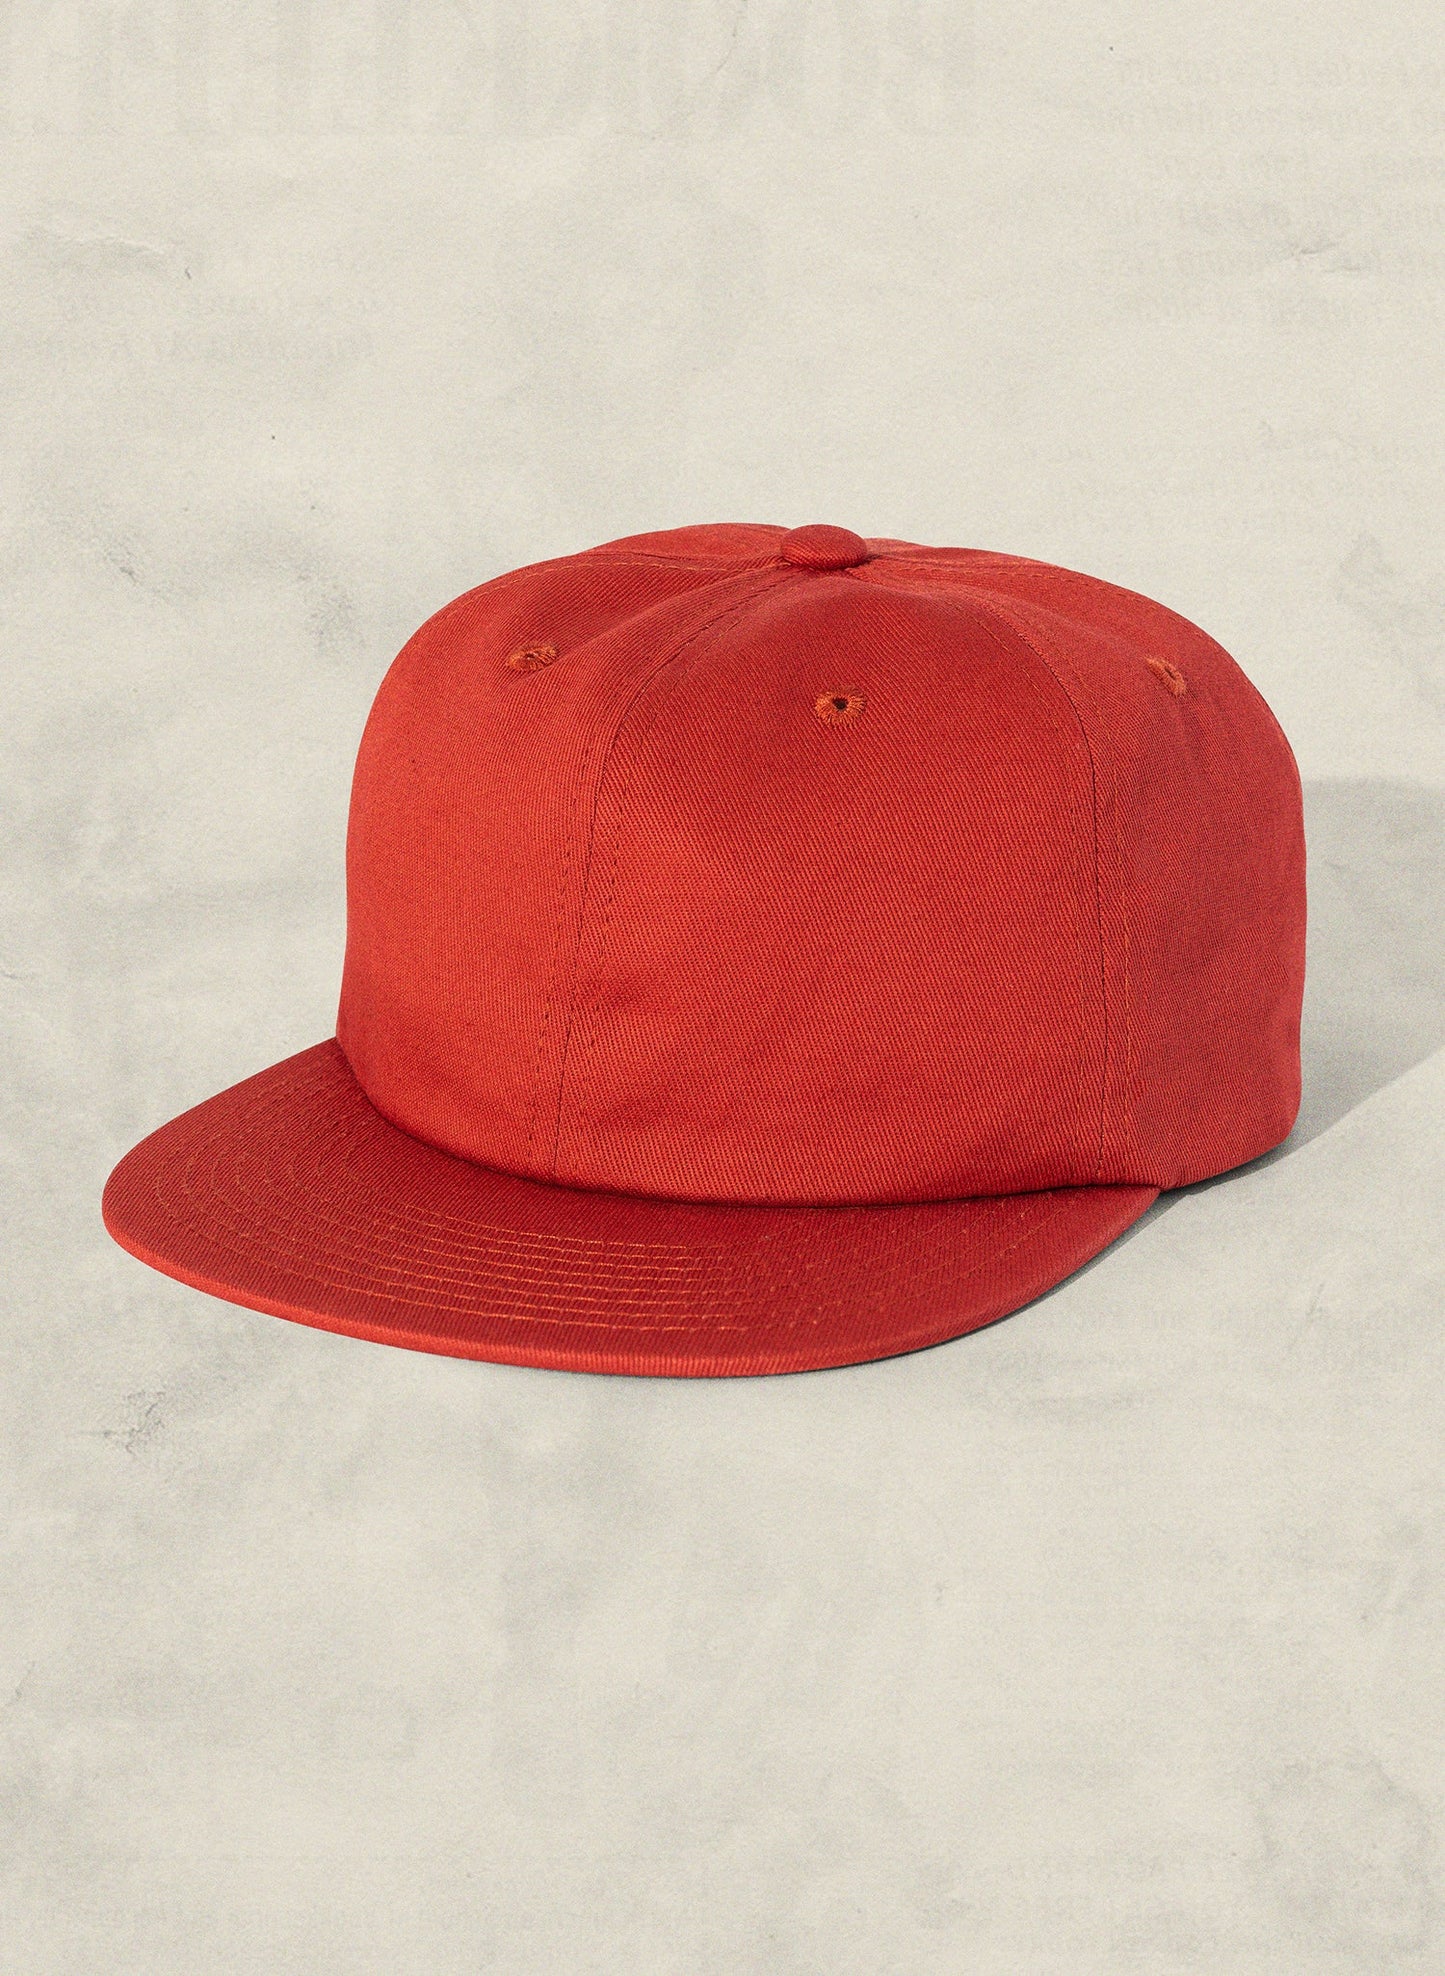 Weld Mfg Field Trip Hat - Unstructured 6 panel brushed cotton twill strapback hat, vintage inspired baseball hat, red